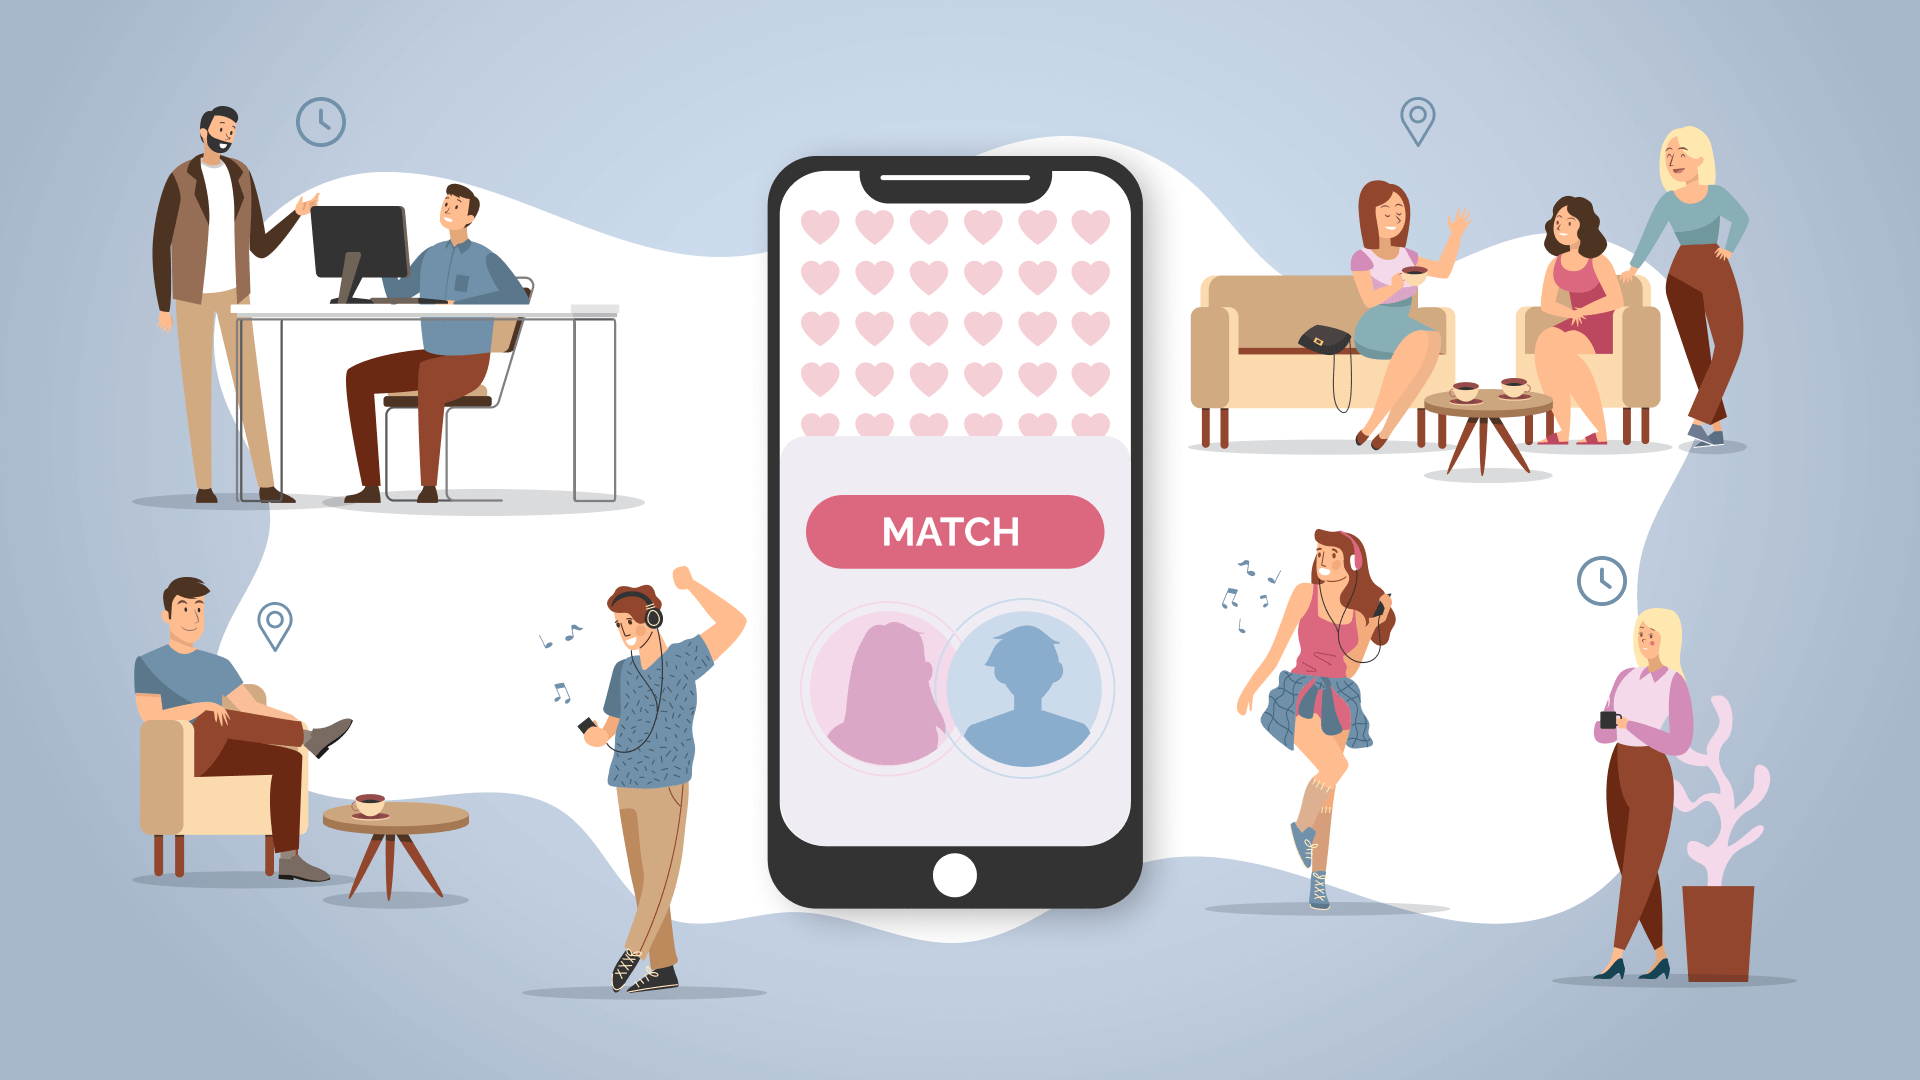 Five reasons why online dating services are beneficial.